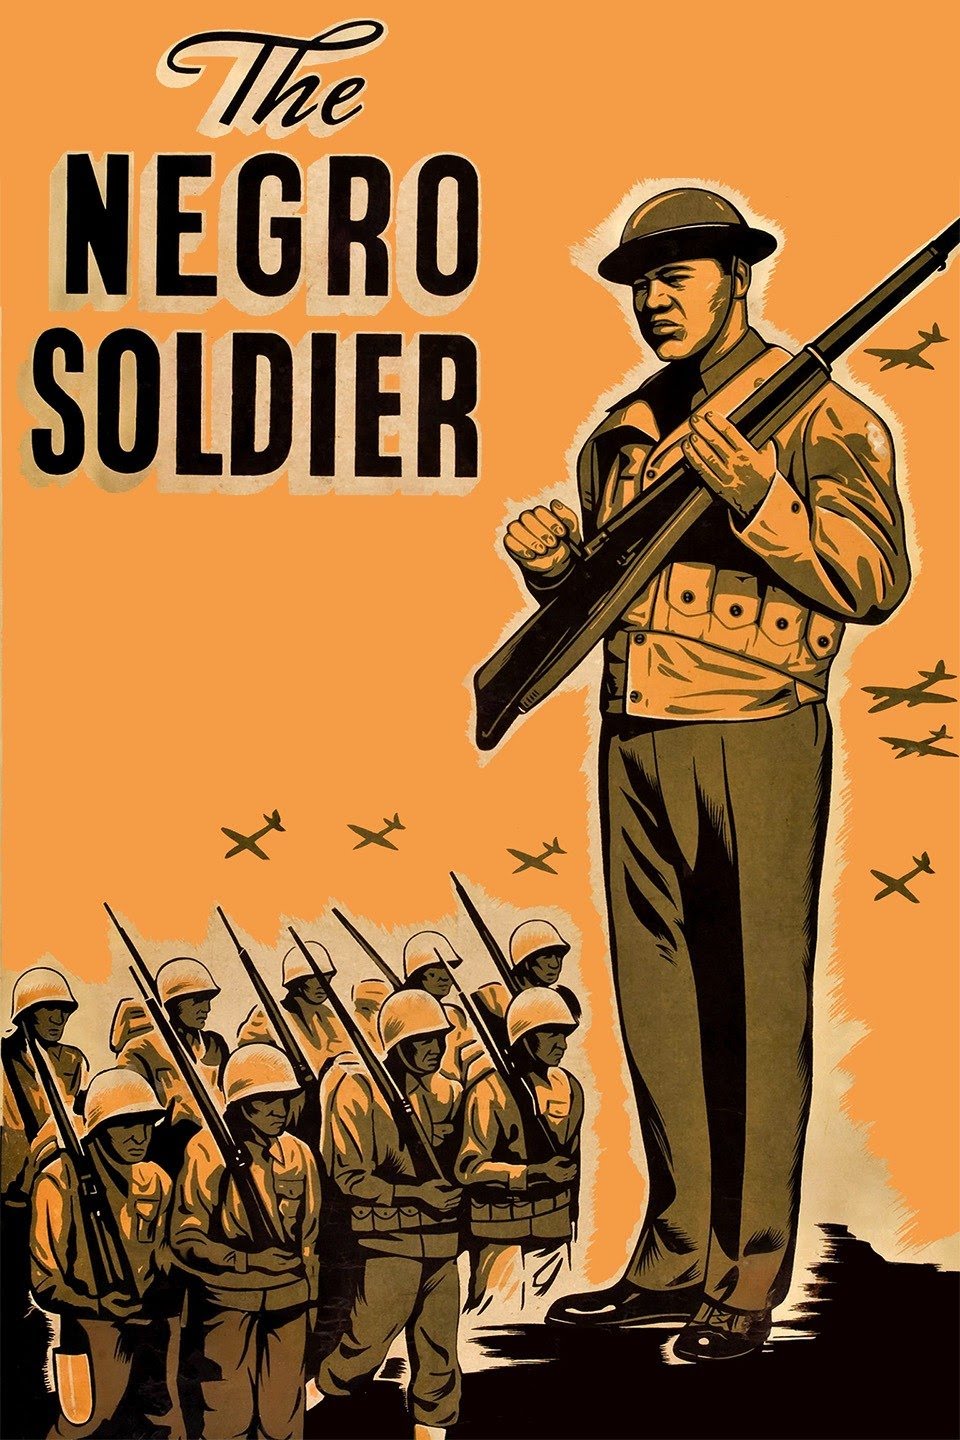 Poster featuring Black soldier wearing a helmet and carrying a rifle with orange background and gold lettering